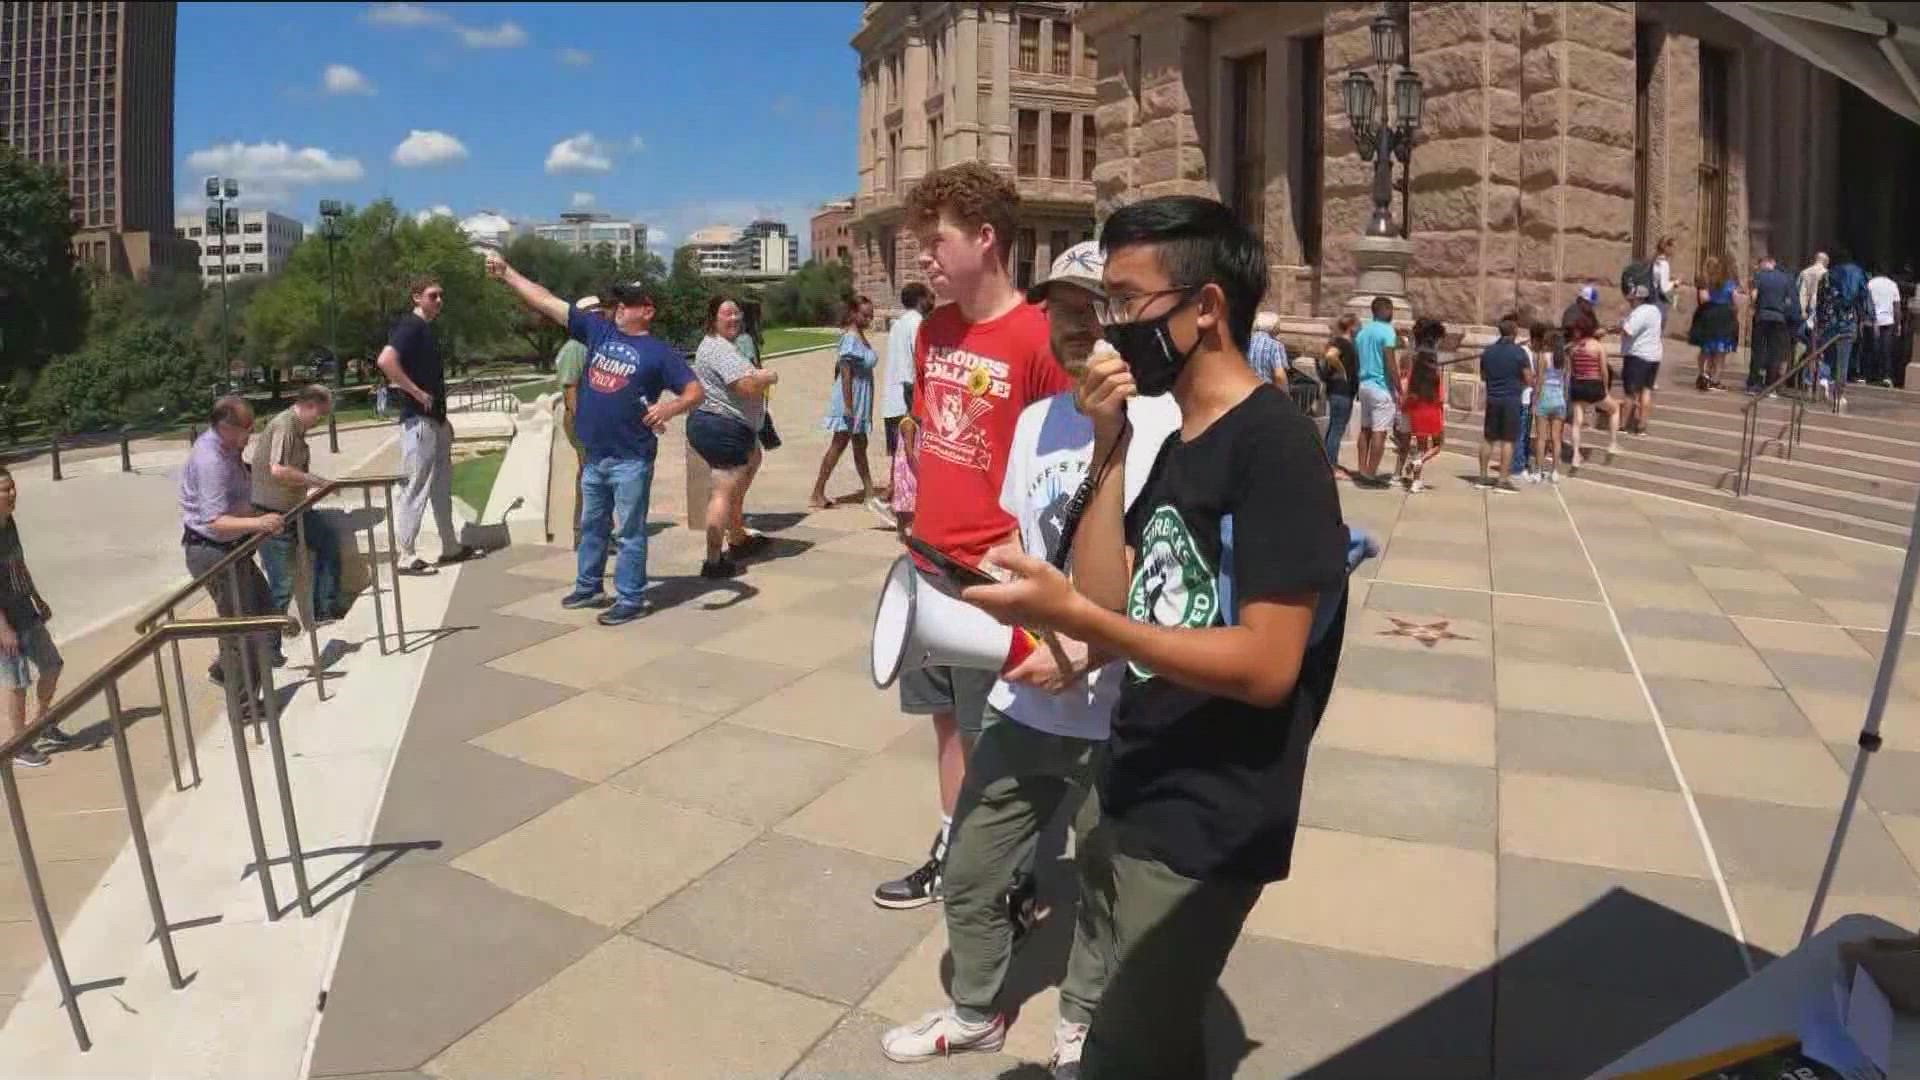 At the Texas Capitol, blue-collar workers spoke out on a day that has them working as usual. KVUE spoke with those workers.